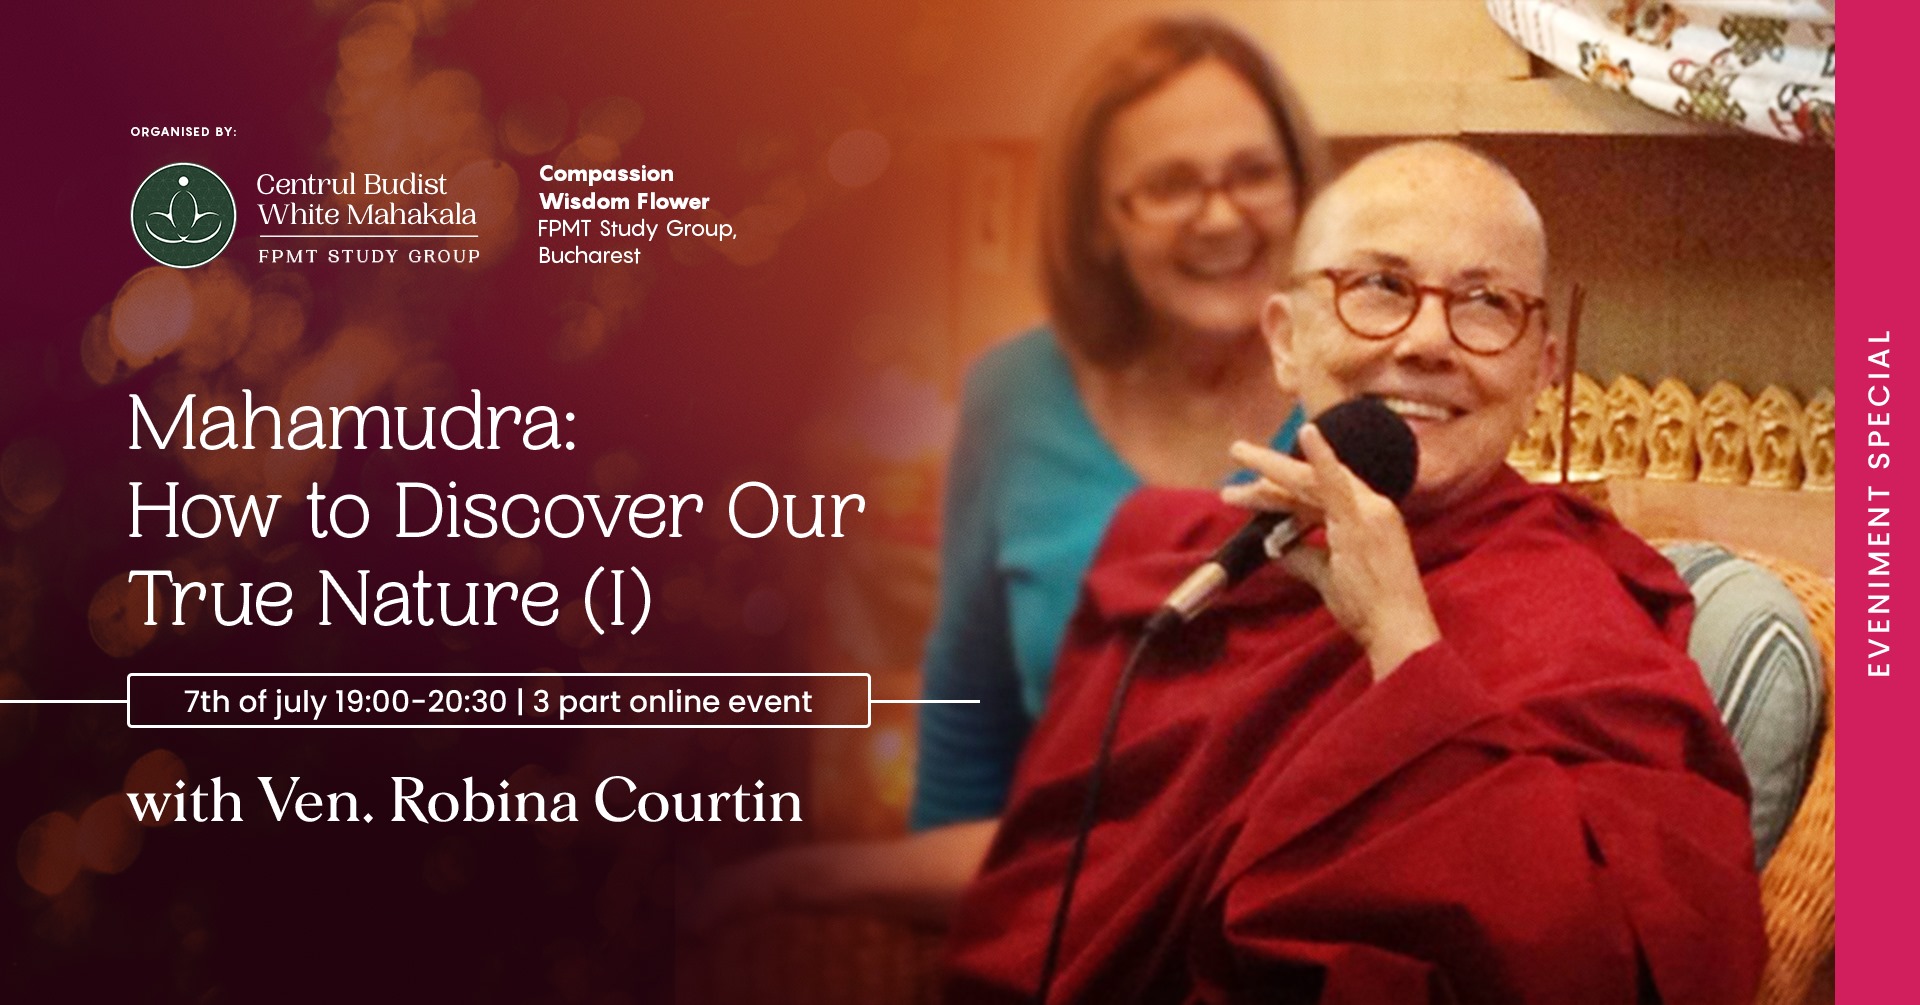 Mahamudra: How to Discover our True Nature with Ven. Robina Courtin